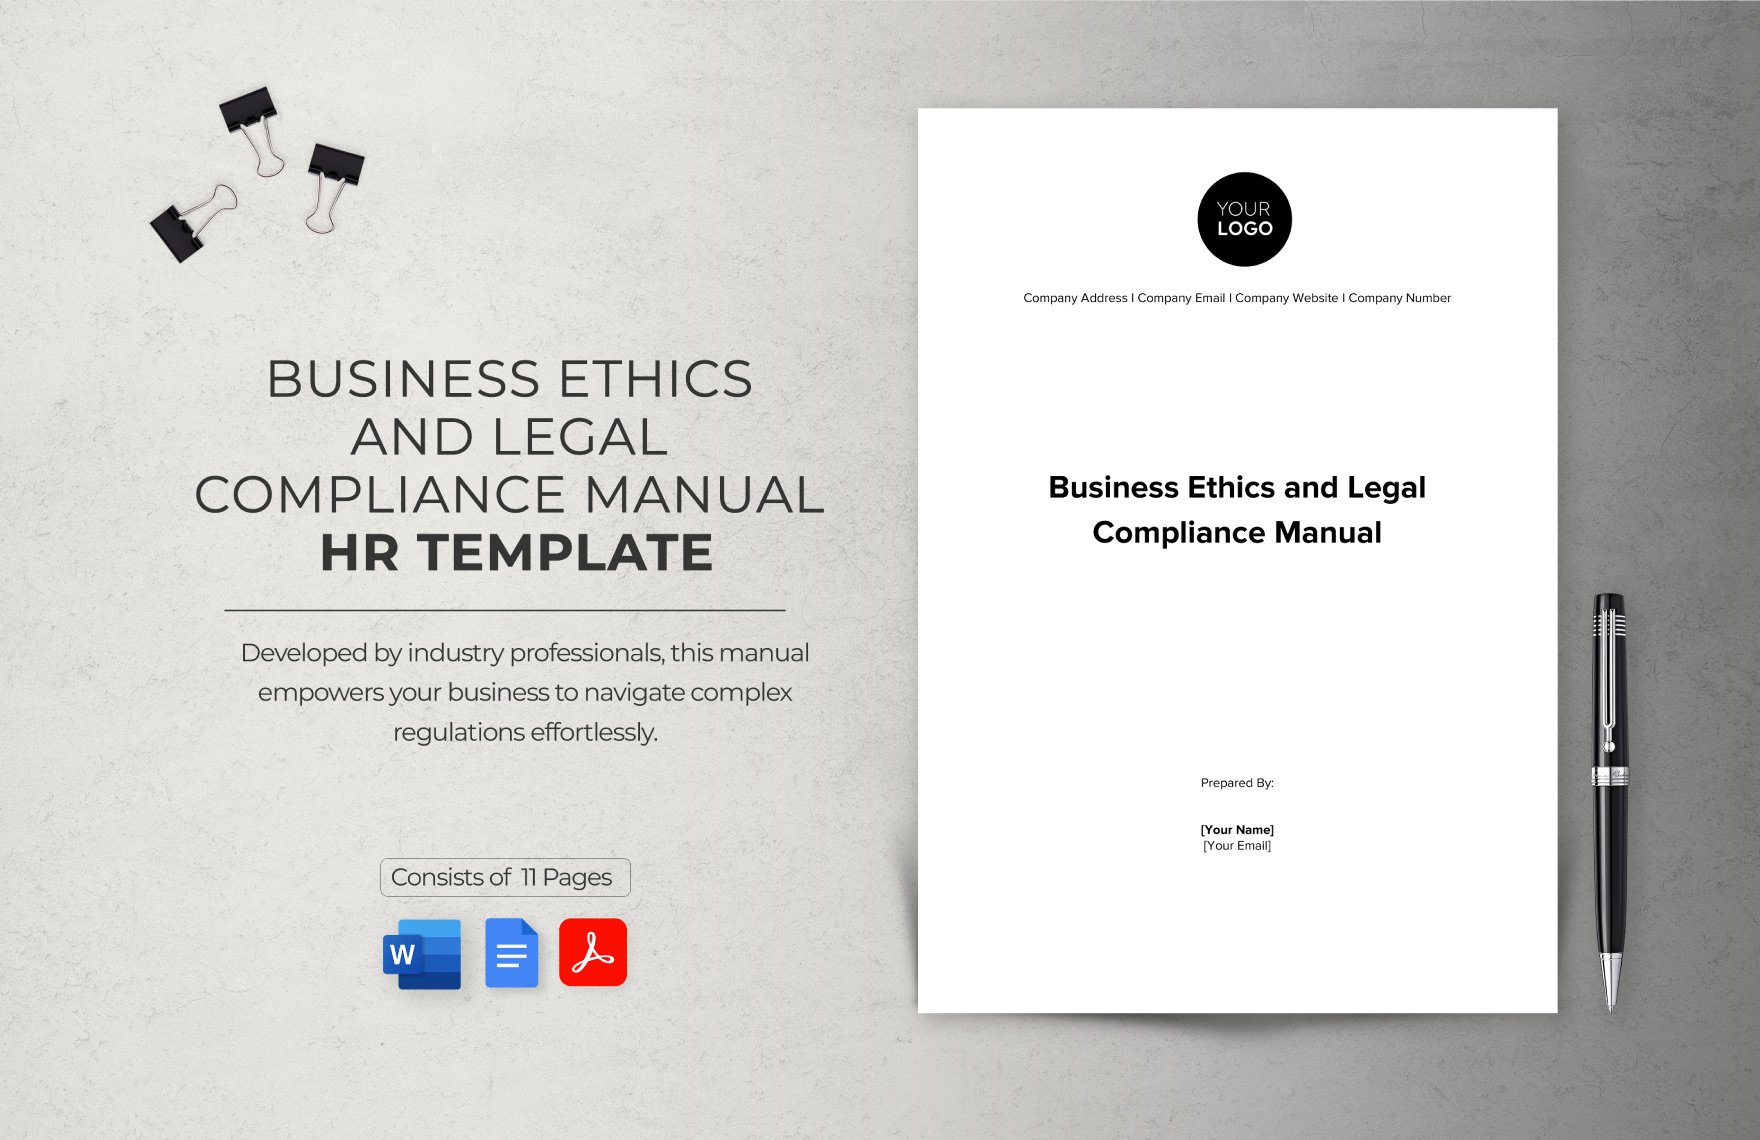 Business Ethics and Legal Compliance Manual HR Template